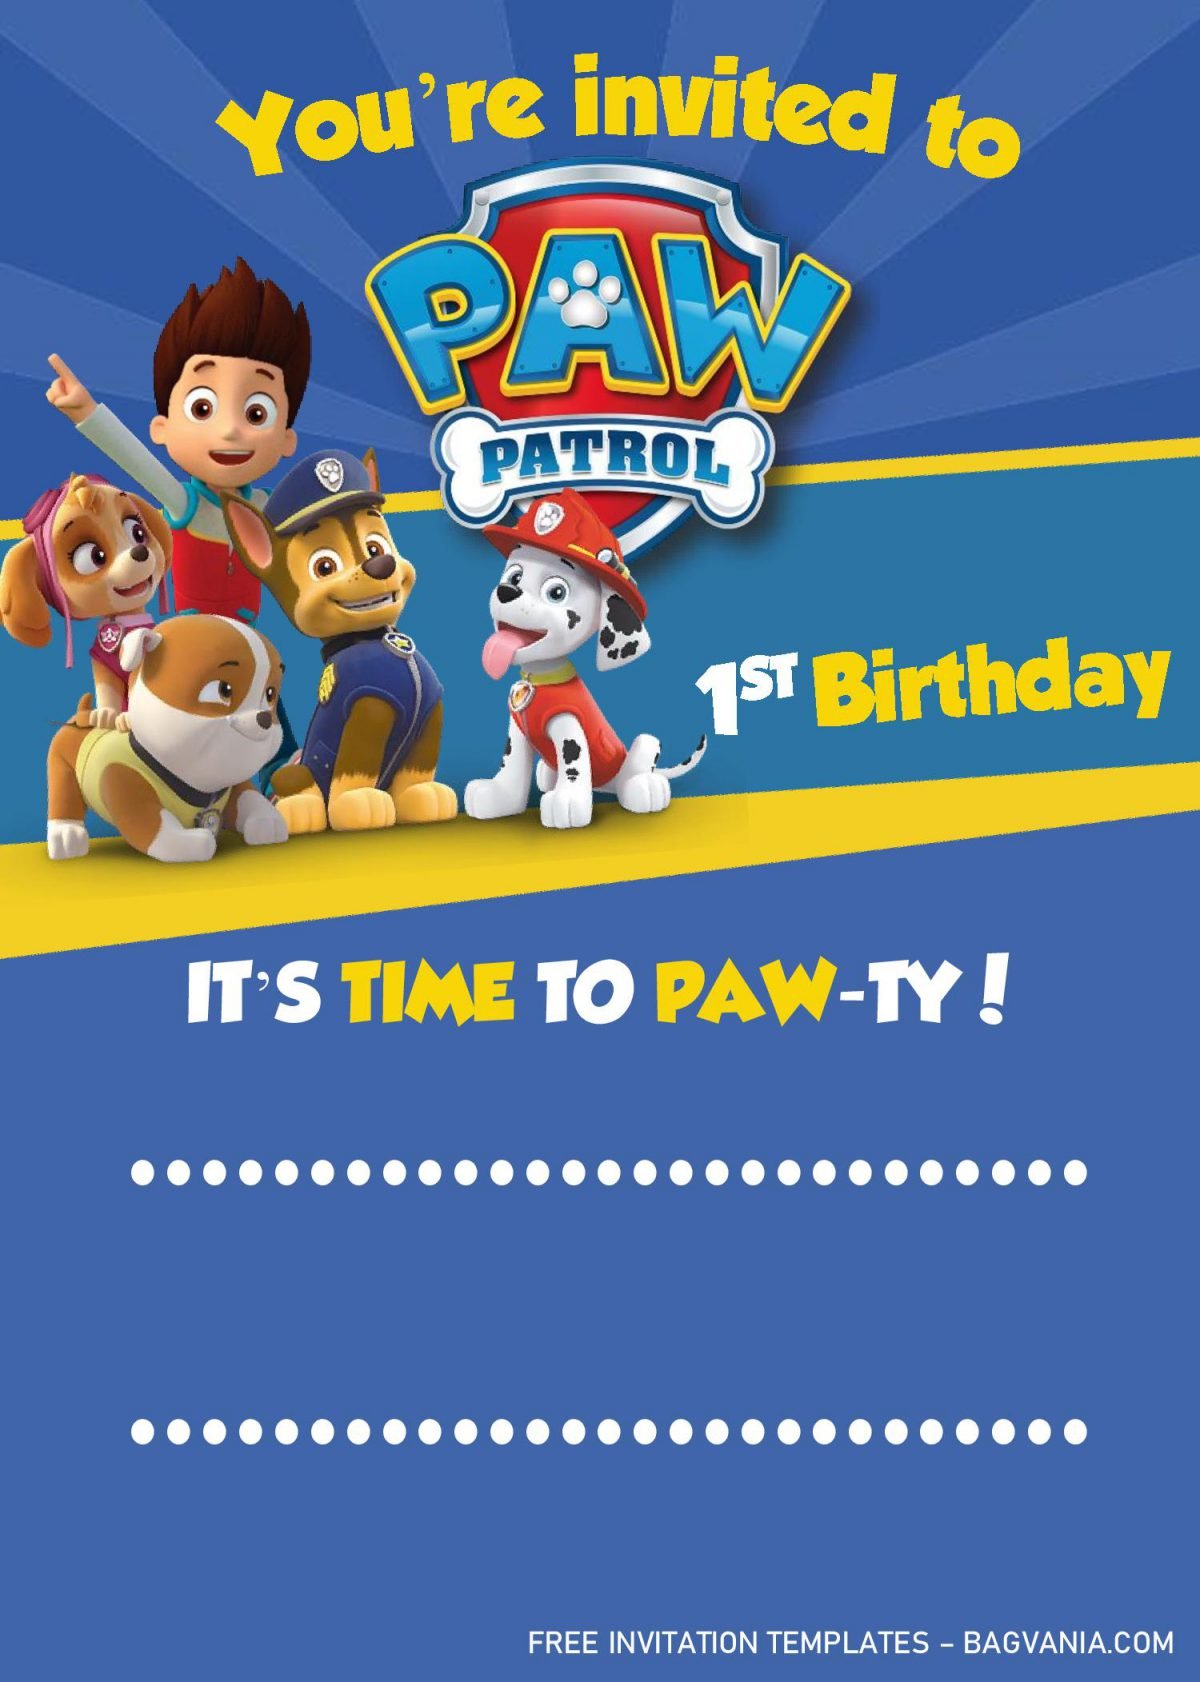 Paw Patrol Invitation Templates - Editable With MS Word and has blue background